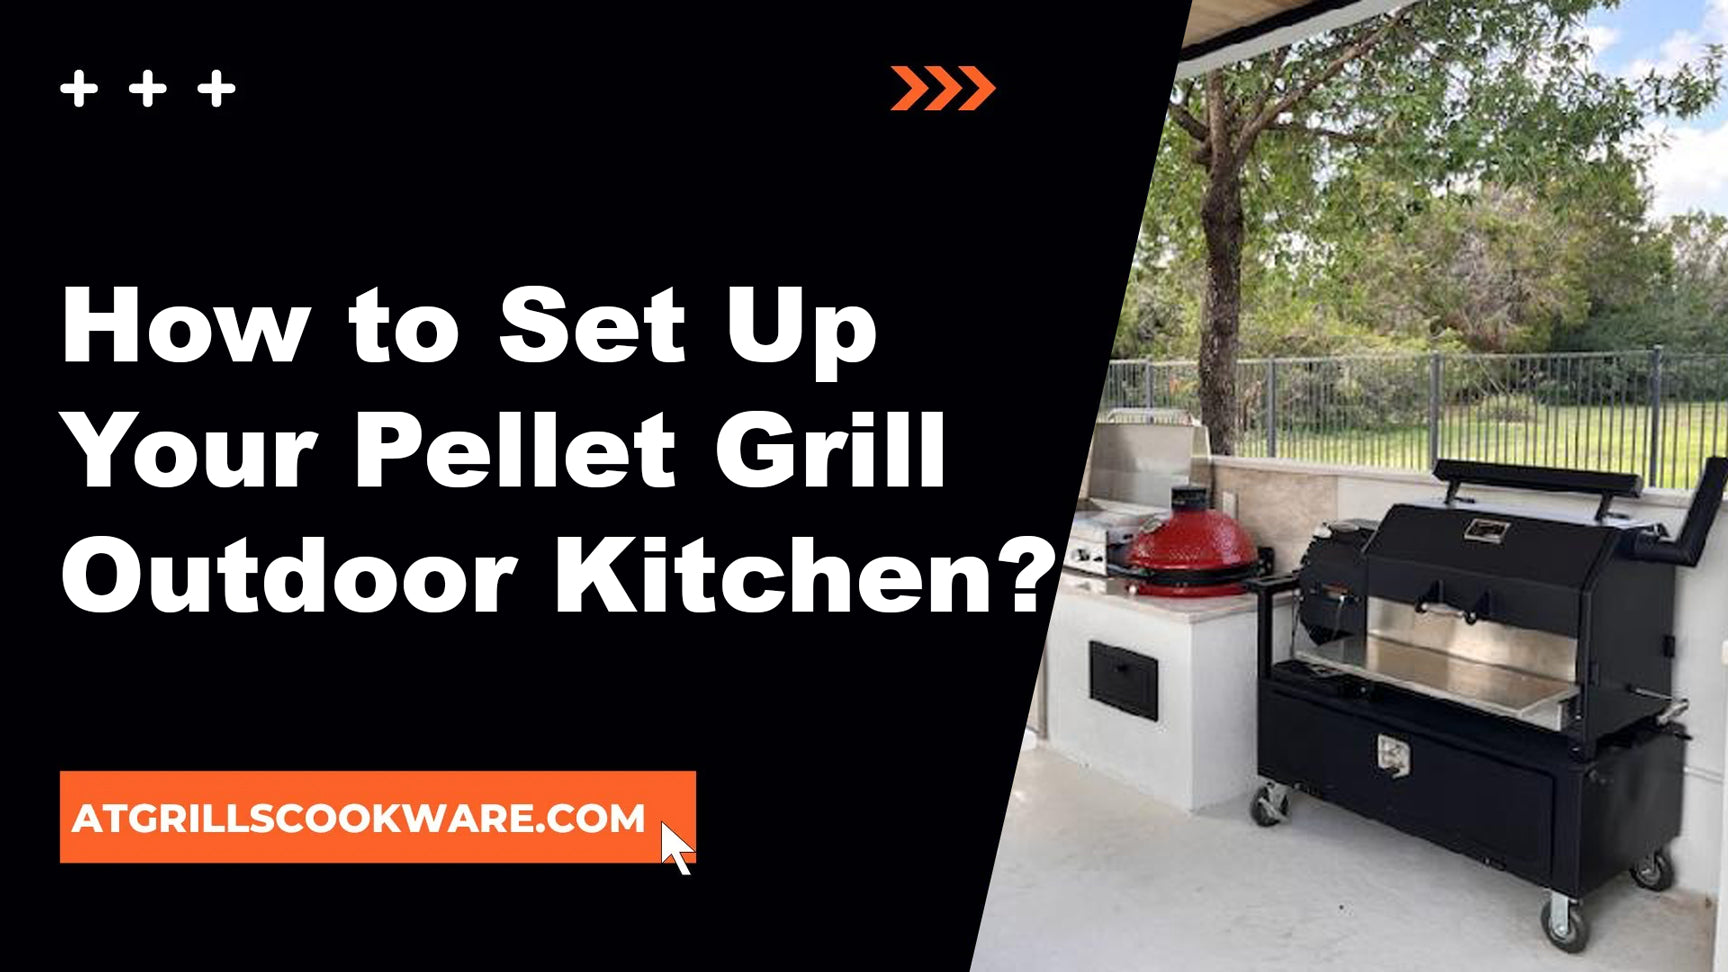 How to Set Up Your Pellet Grill Outdoor Kitchen?